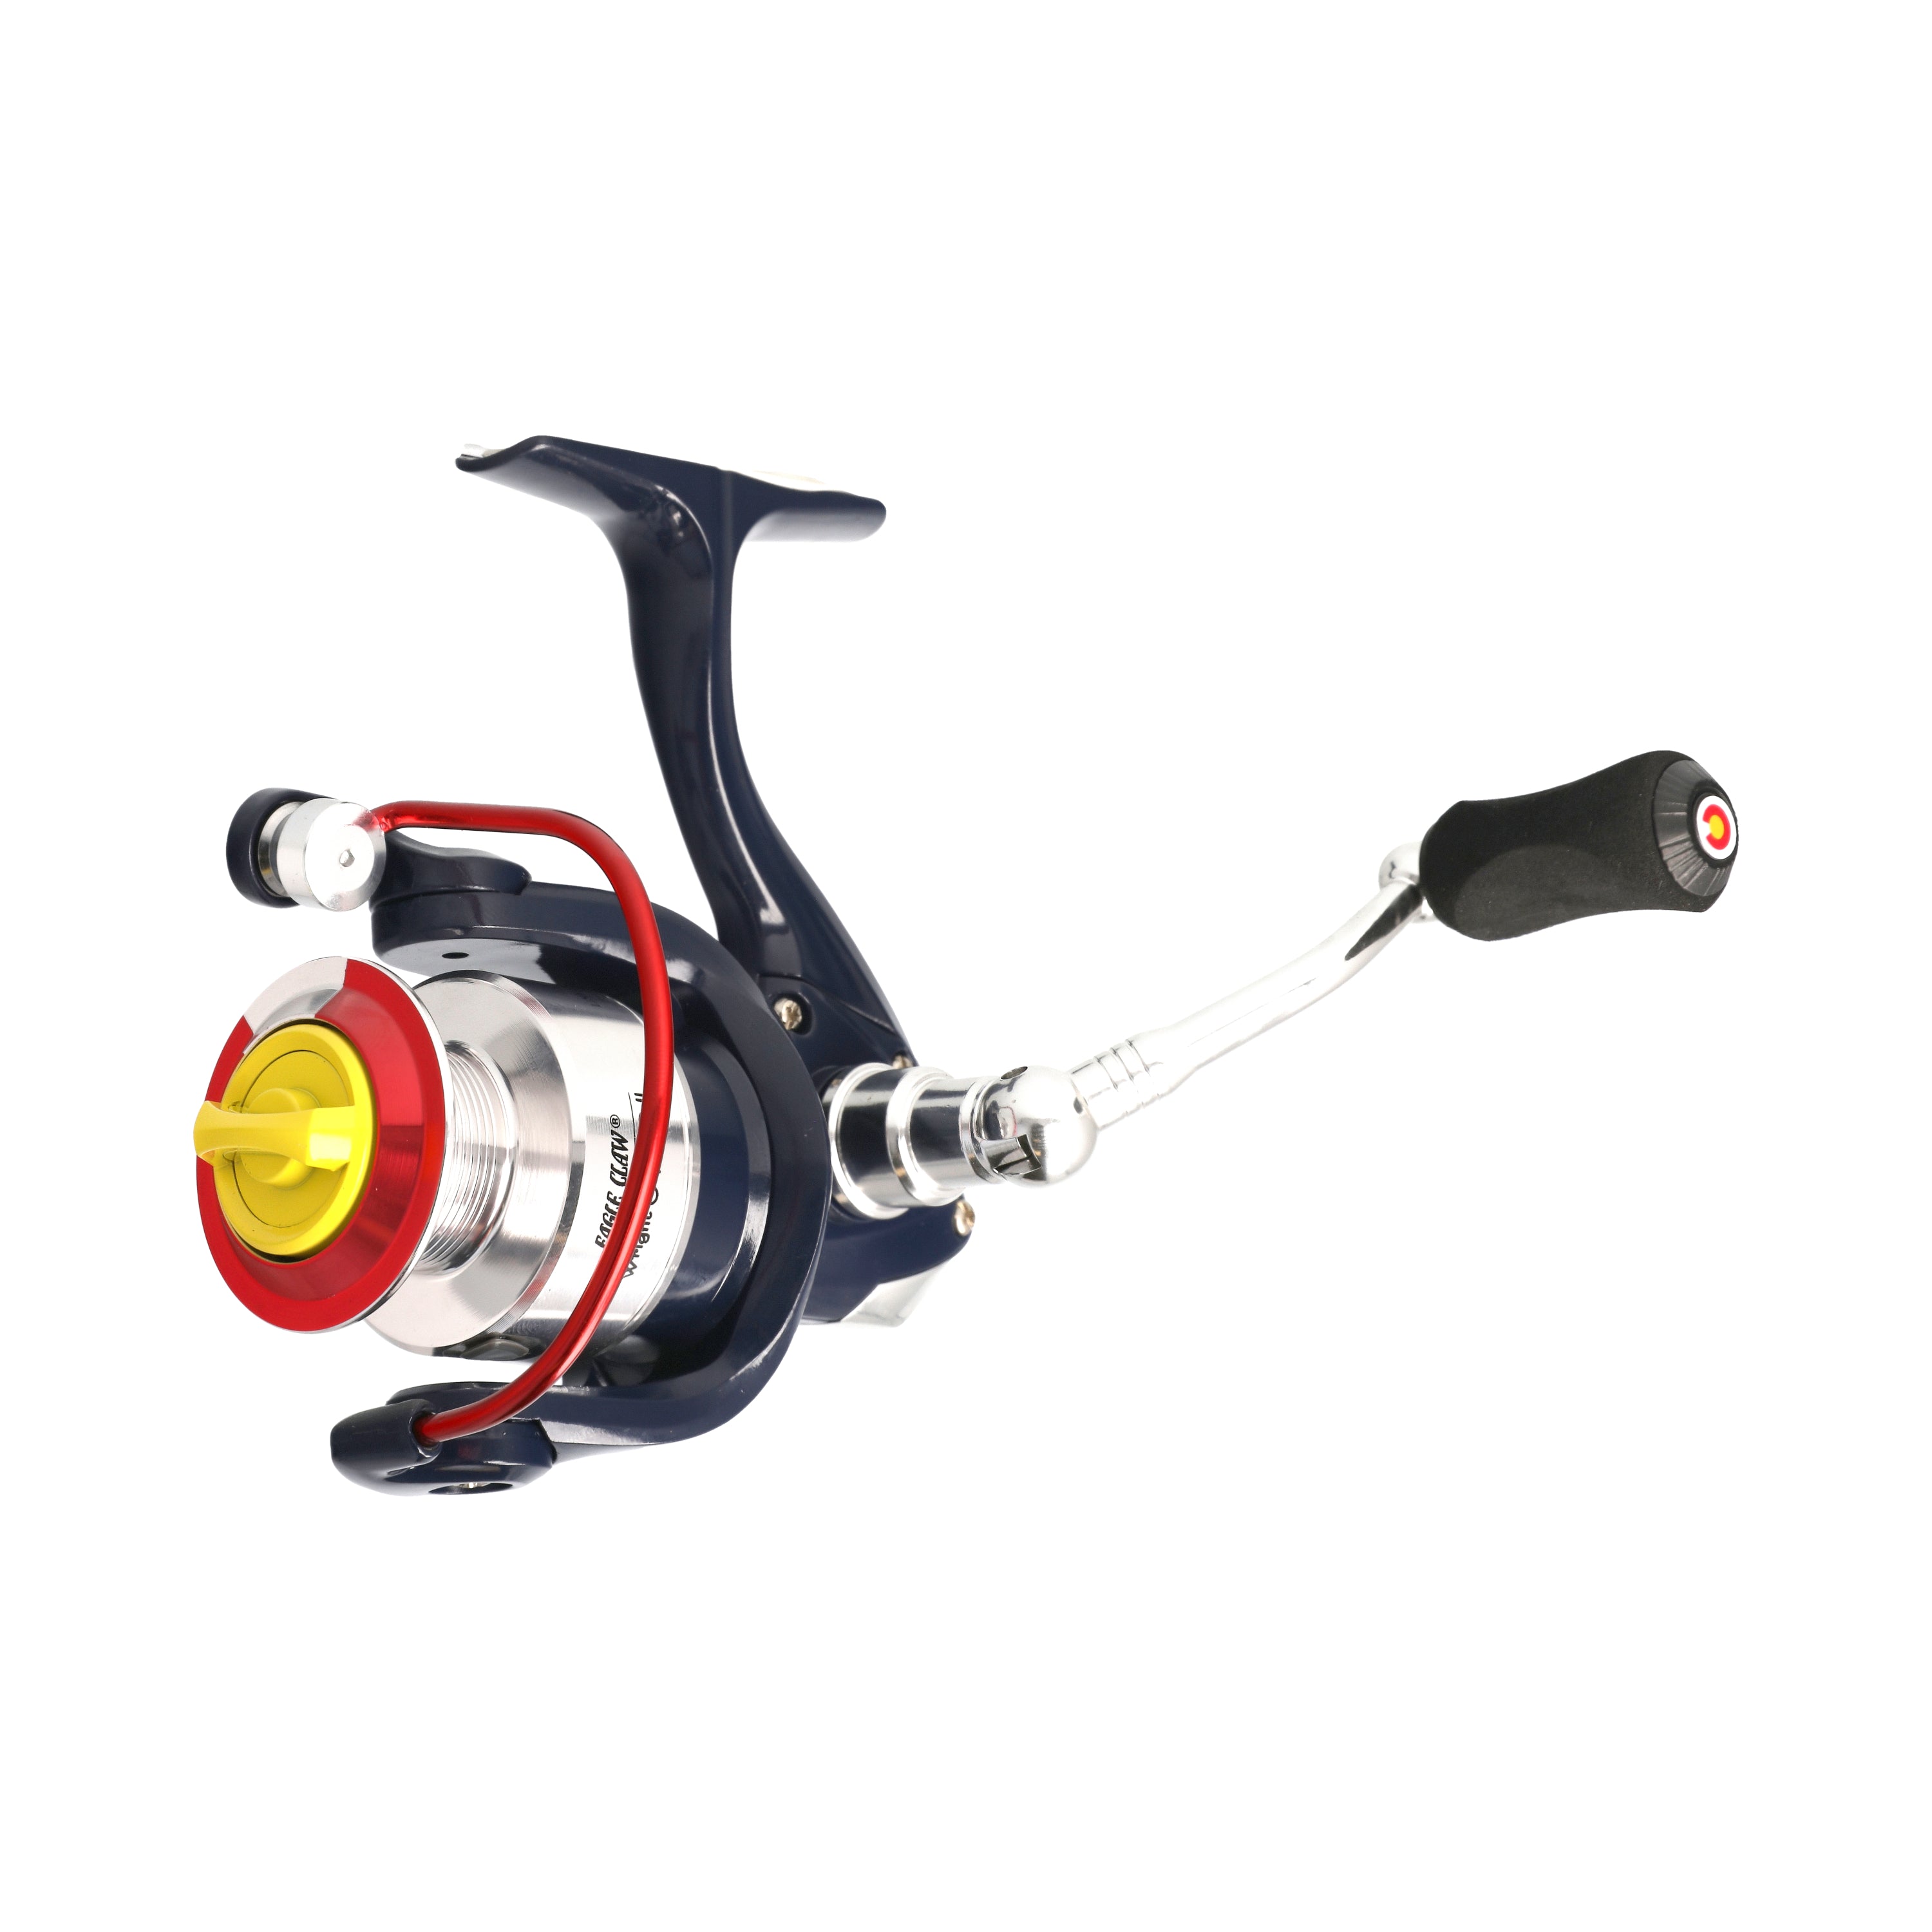 Eagle Claw Fishing Reels Outdoor Sports 